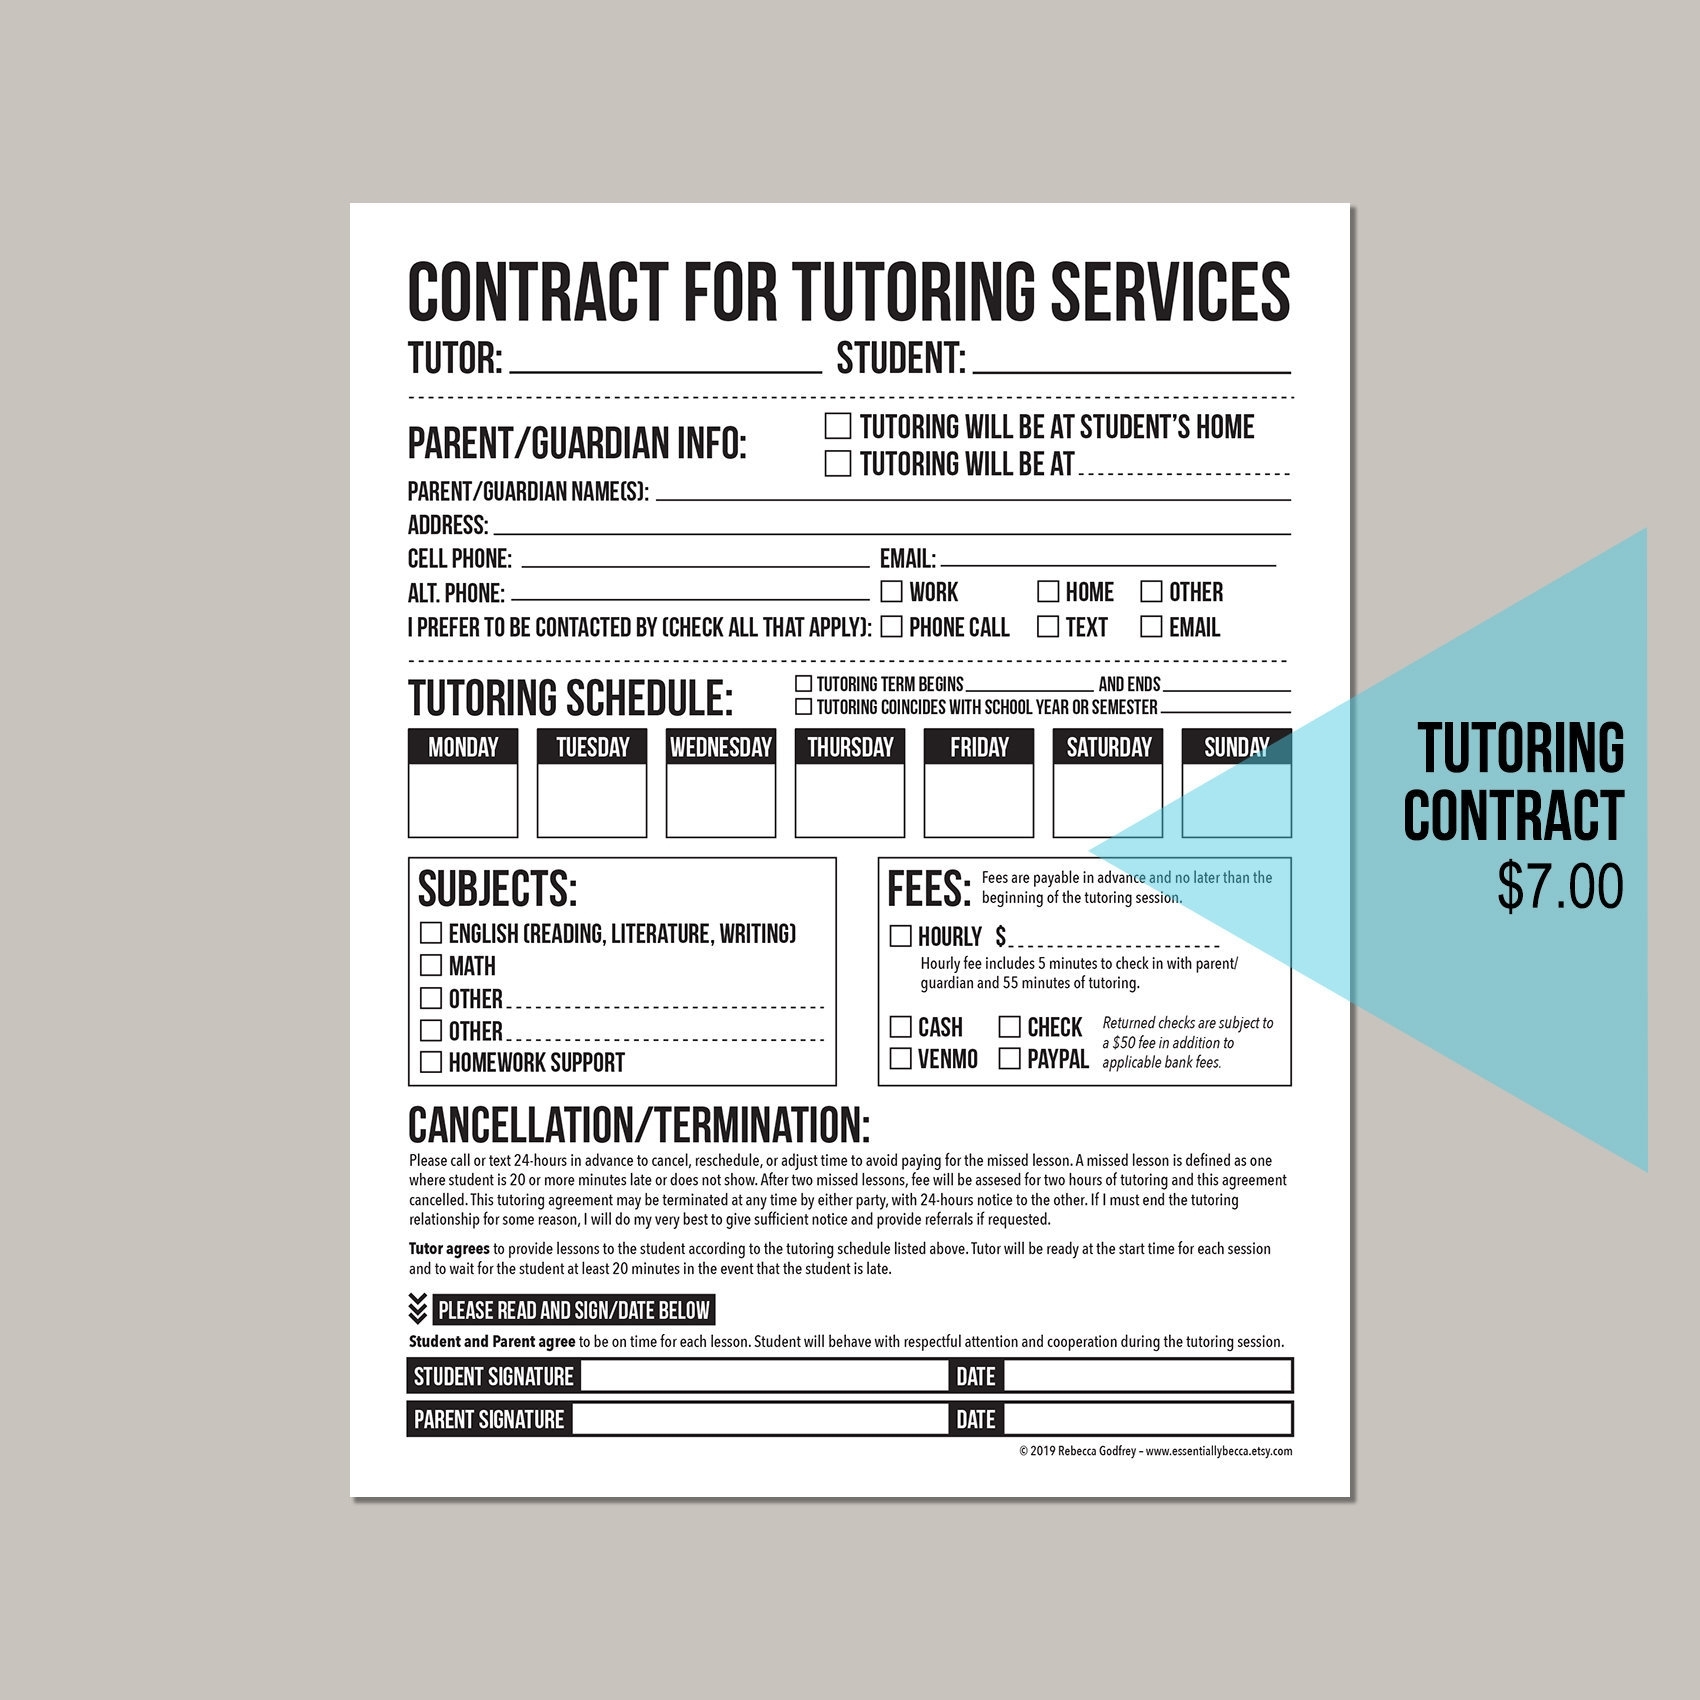 Tutoring Agreement Worksheet: Printable Pdf Form | Etsy with regard to Tutor Session Payment Plan Contract